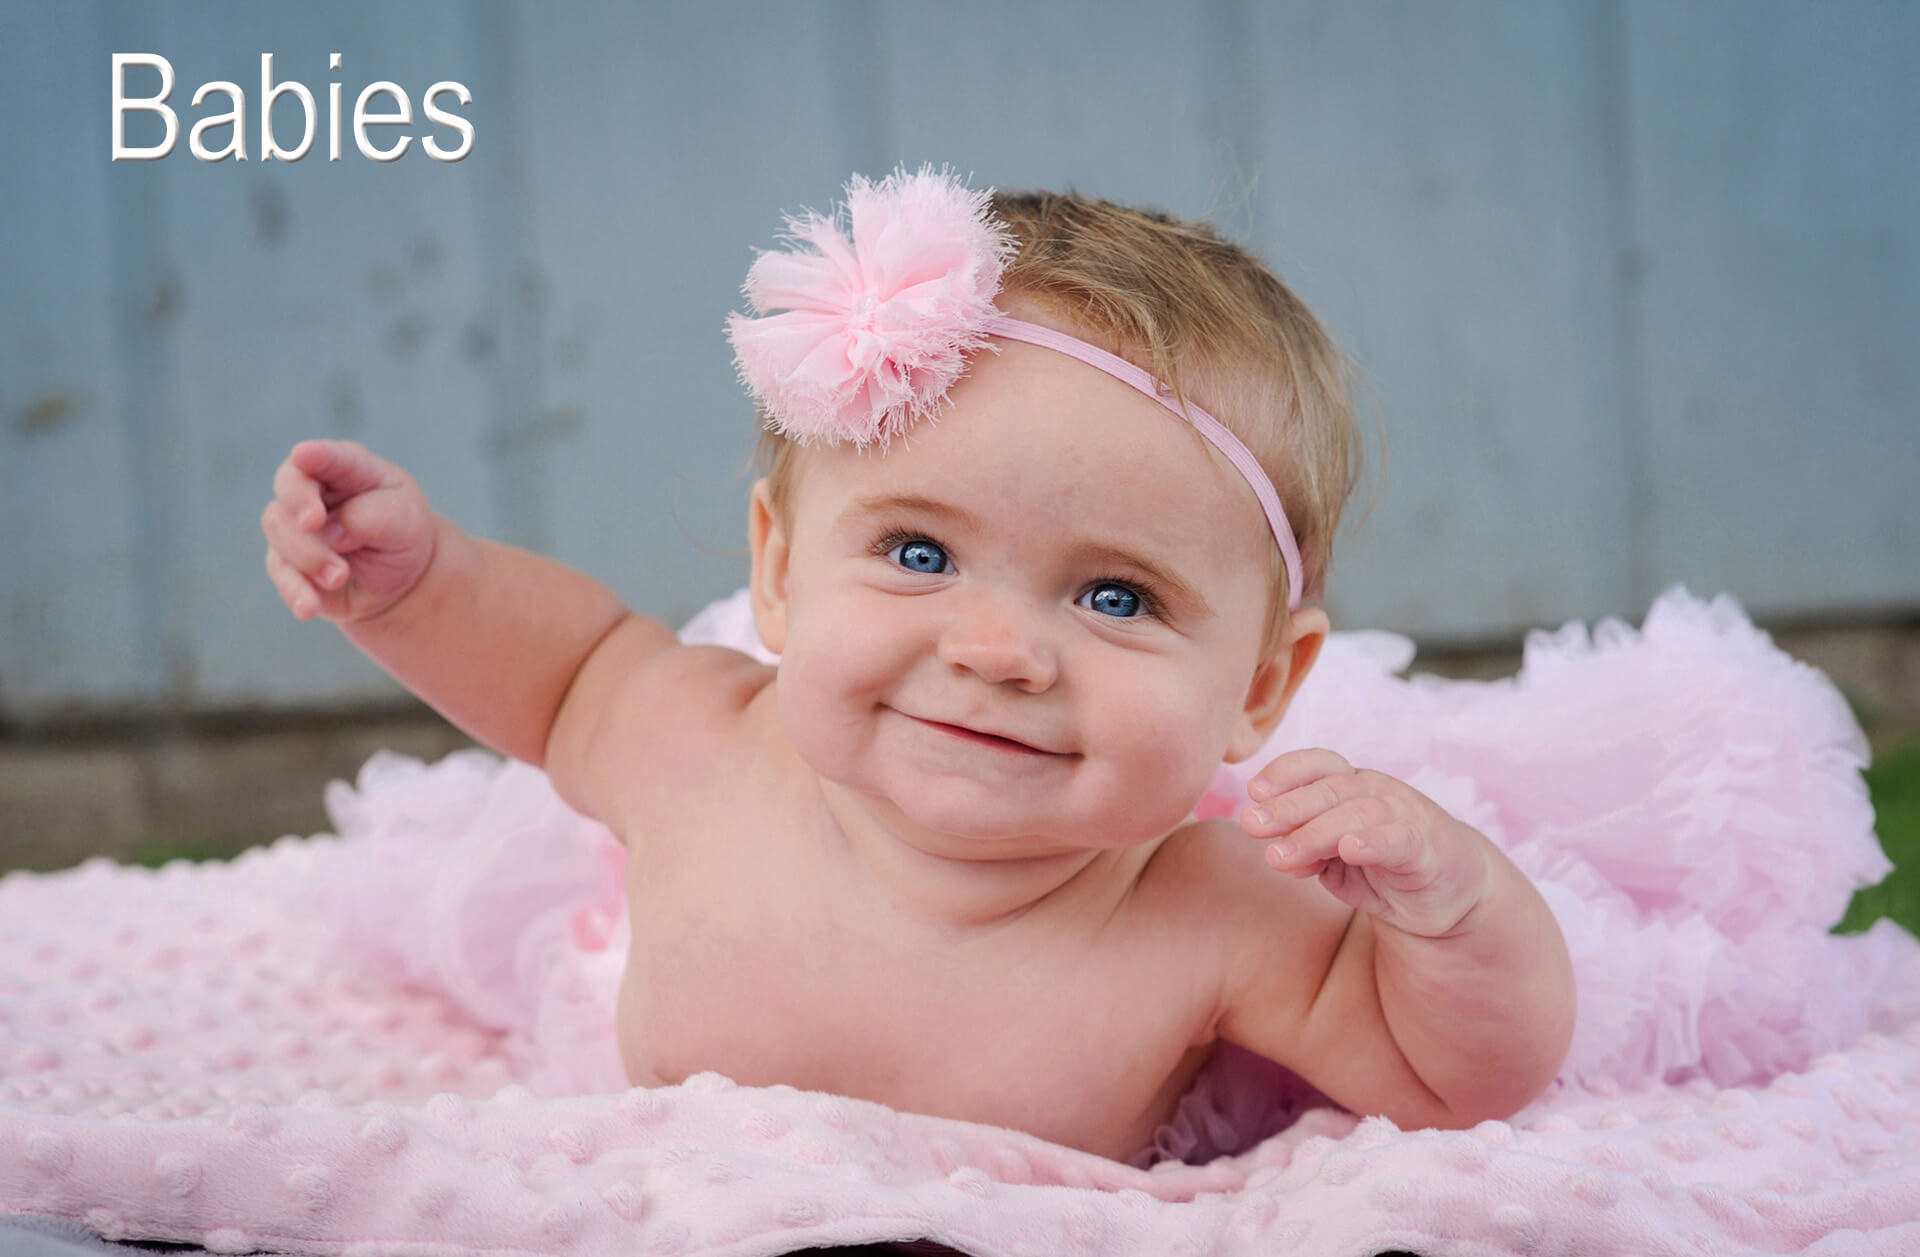 A little girl's sixth month photo session features a baby in Troy, Michigan in her tutu during best baby photographer Marci Curtis's Detroit baby photography session.